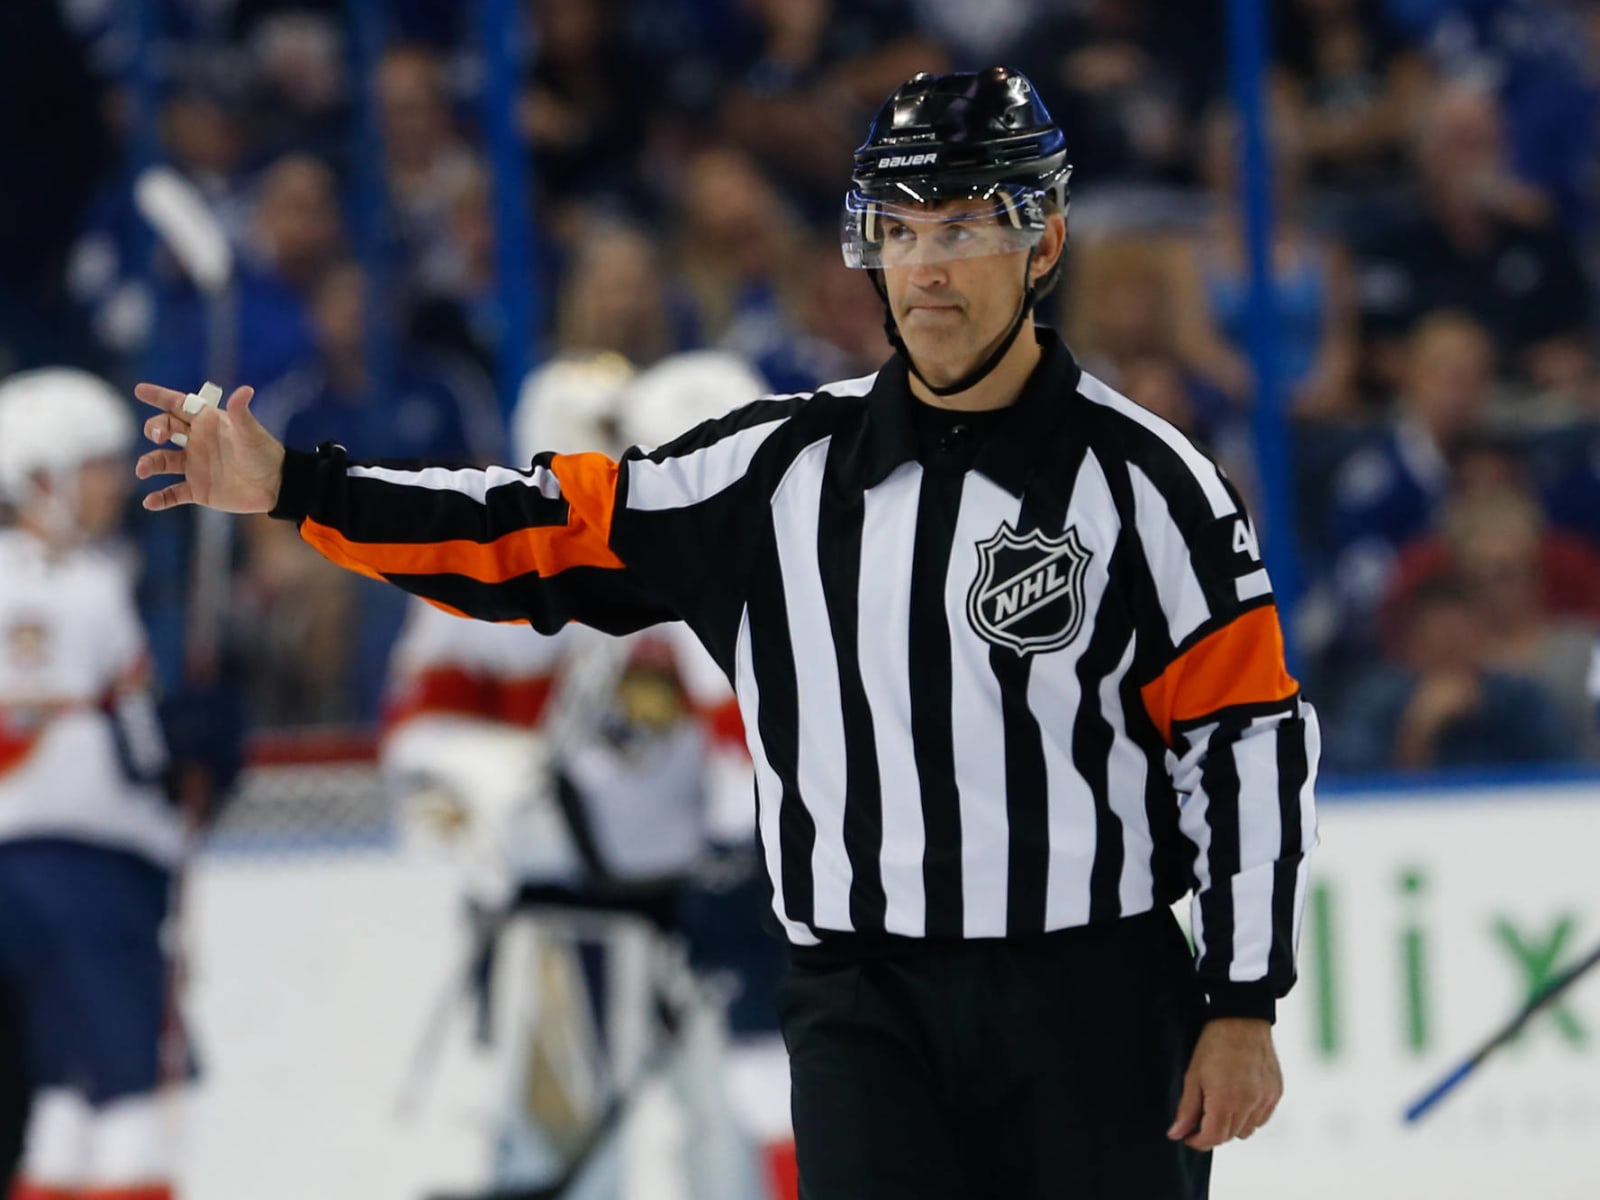 Ex-Spartans defenseman Wes McCauley finds calling as NHL's top referee